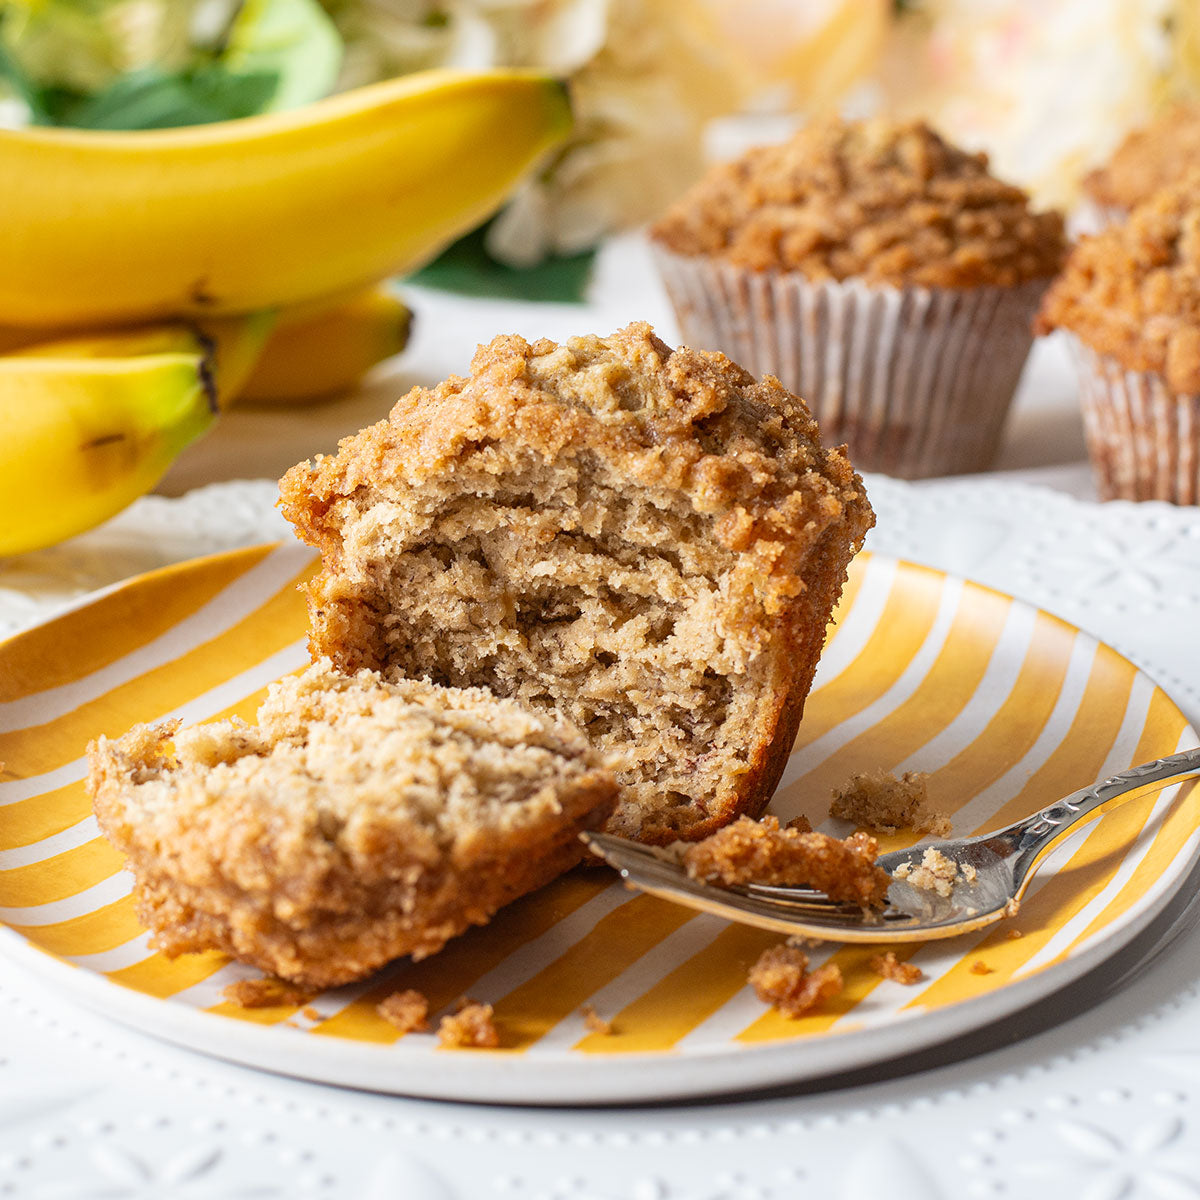 A tempting assortment of Banana Crumb Muffins, capturing their homey and inviting appeal with their jumbo size, ripe banana goodness, and the sweet touch of the brown sugar and cinnamon crumb on top.